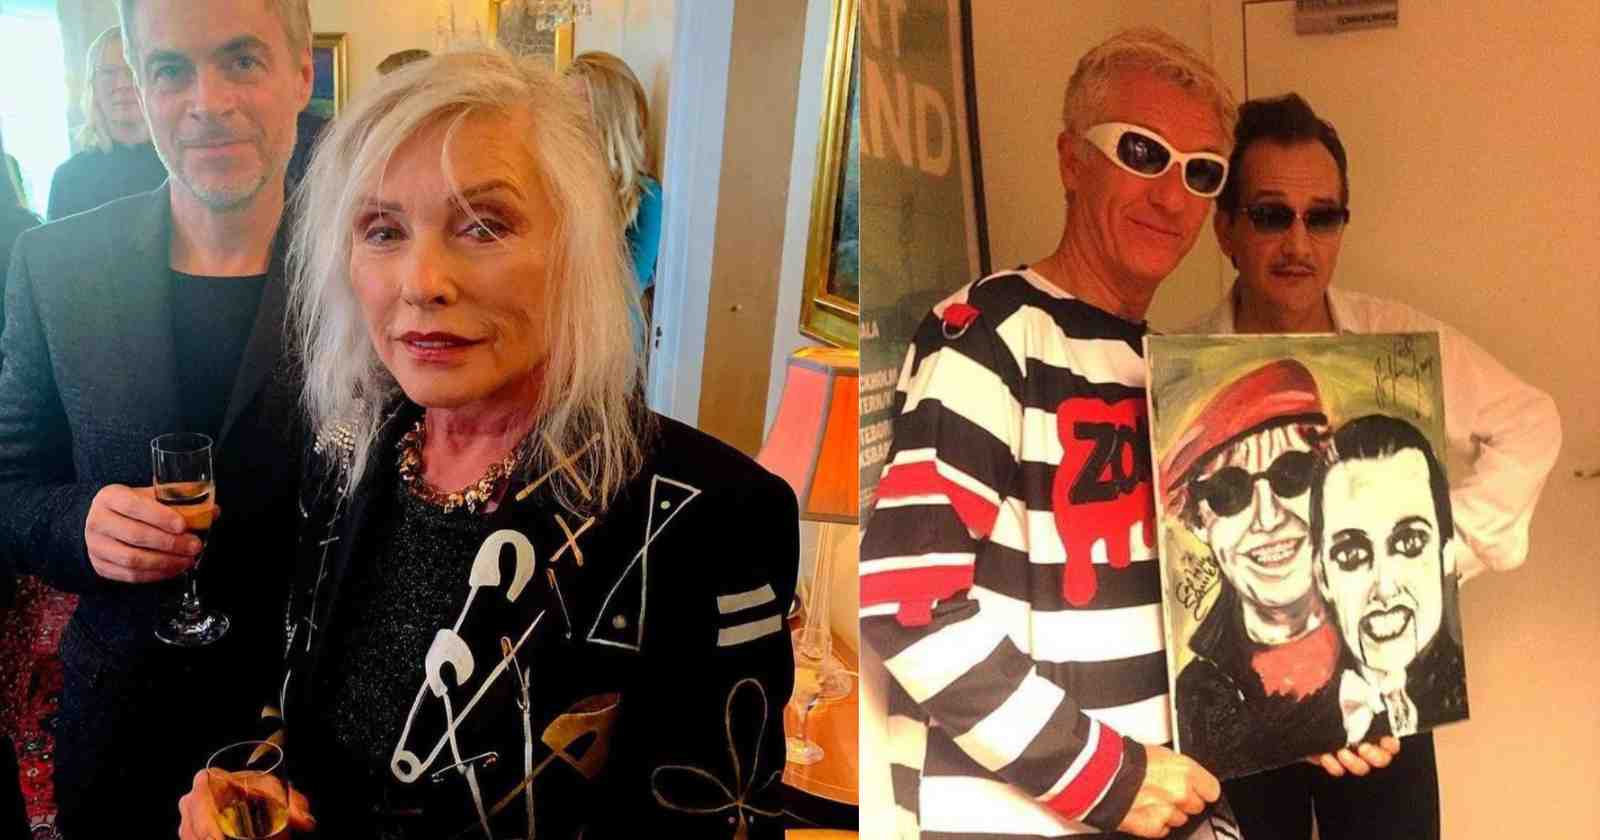 Blondie announces 2022 American tour with The Damned